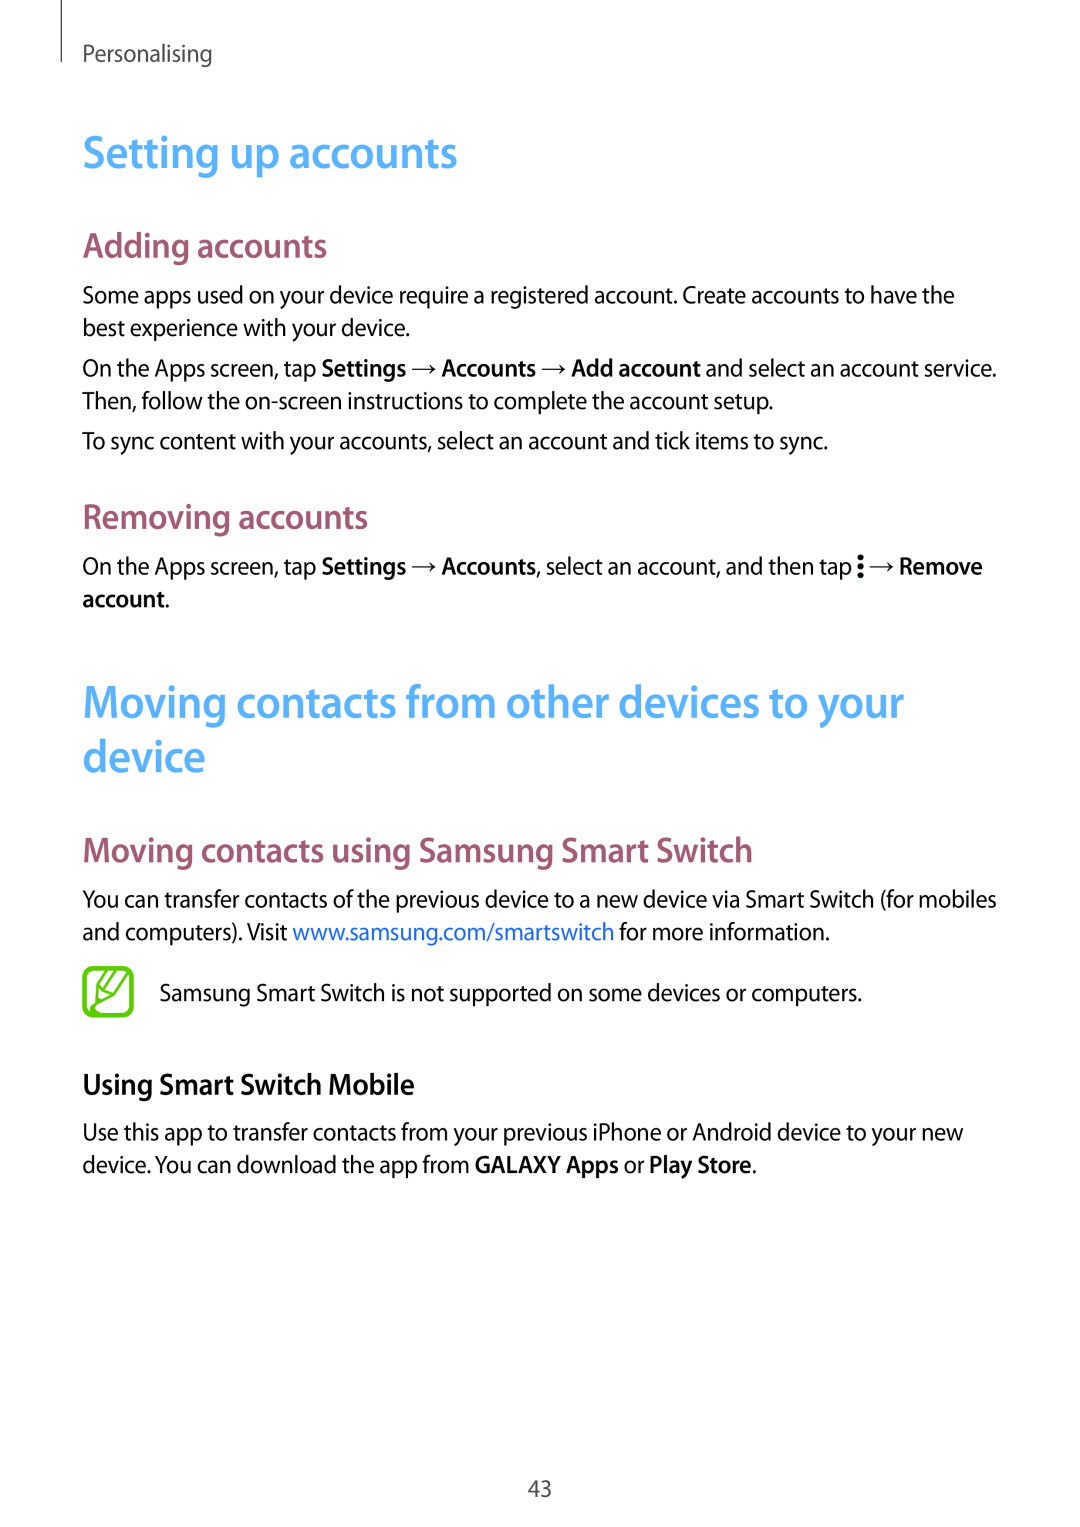 Samsung SM-G901FZKAFTM manual Setting up accounts, Moving contacts from other devices to your device, Adding accounts 